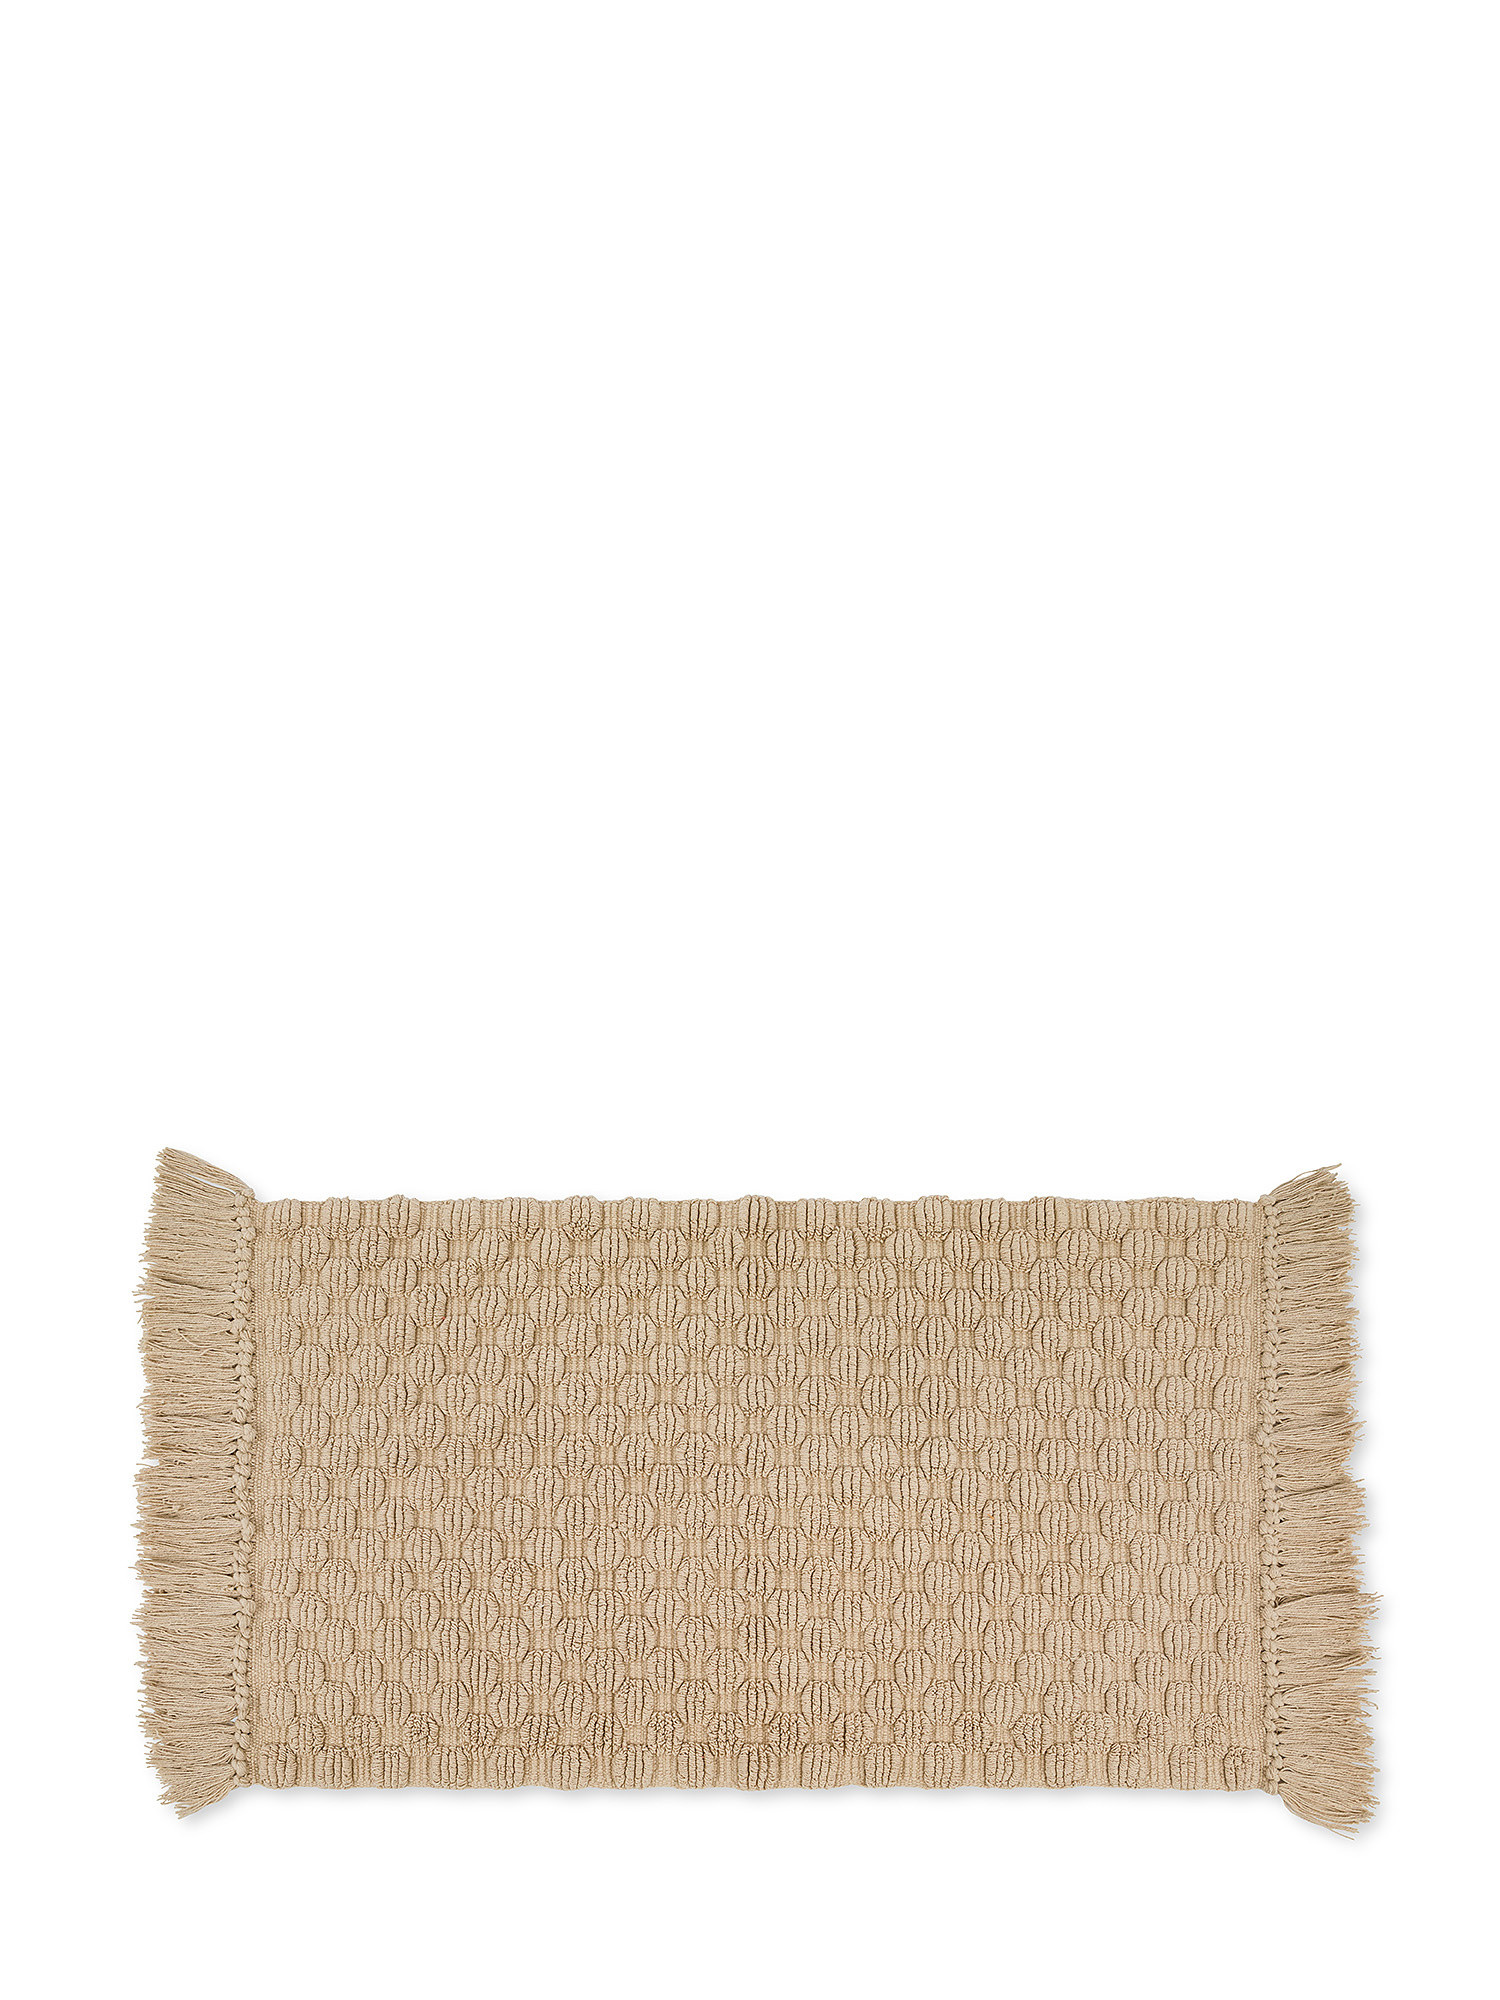 Bath mat in jacquard fabric with relief motif, Beige, large image number 0